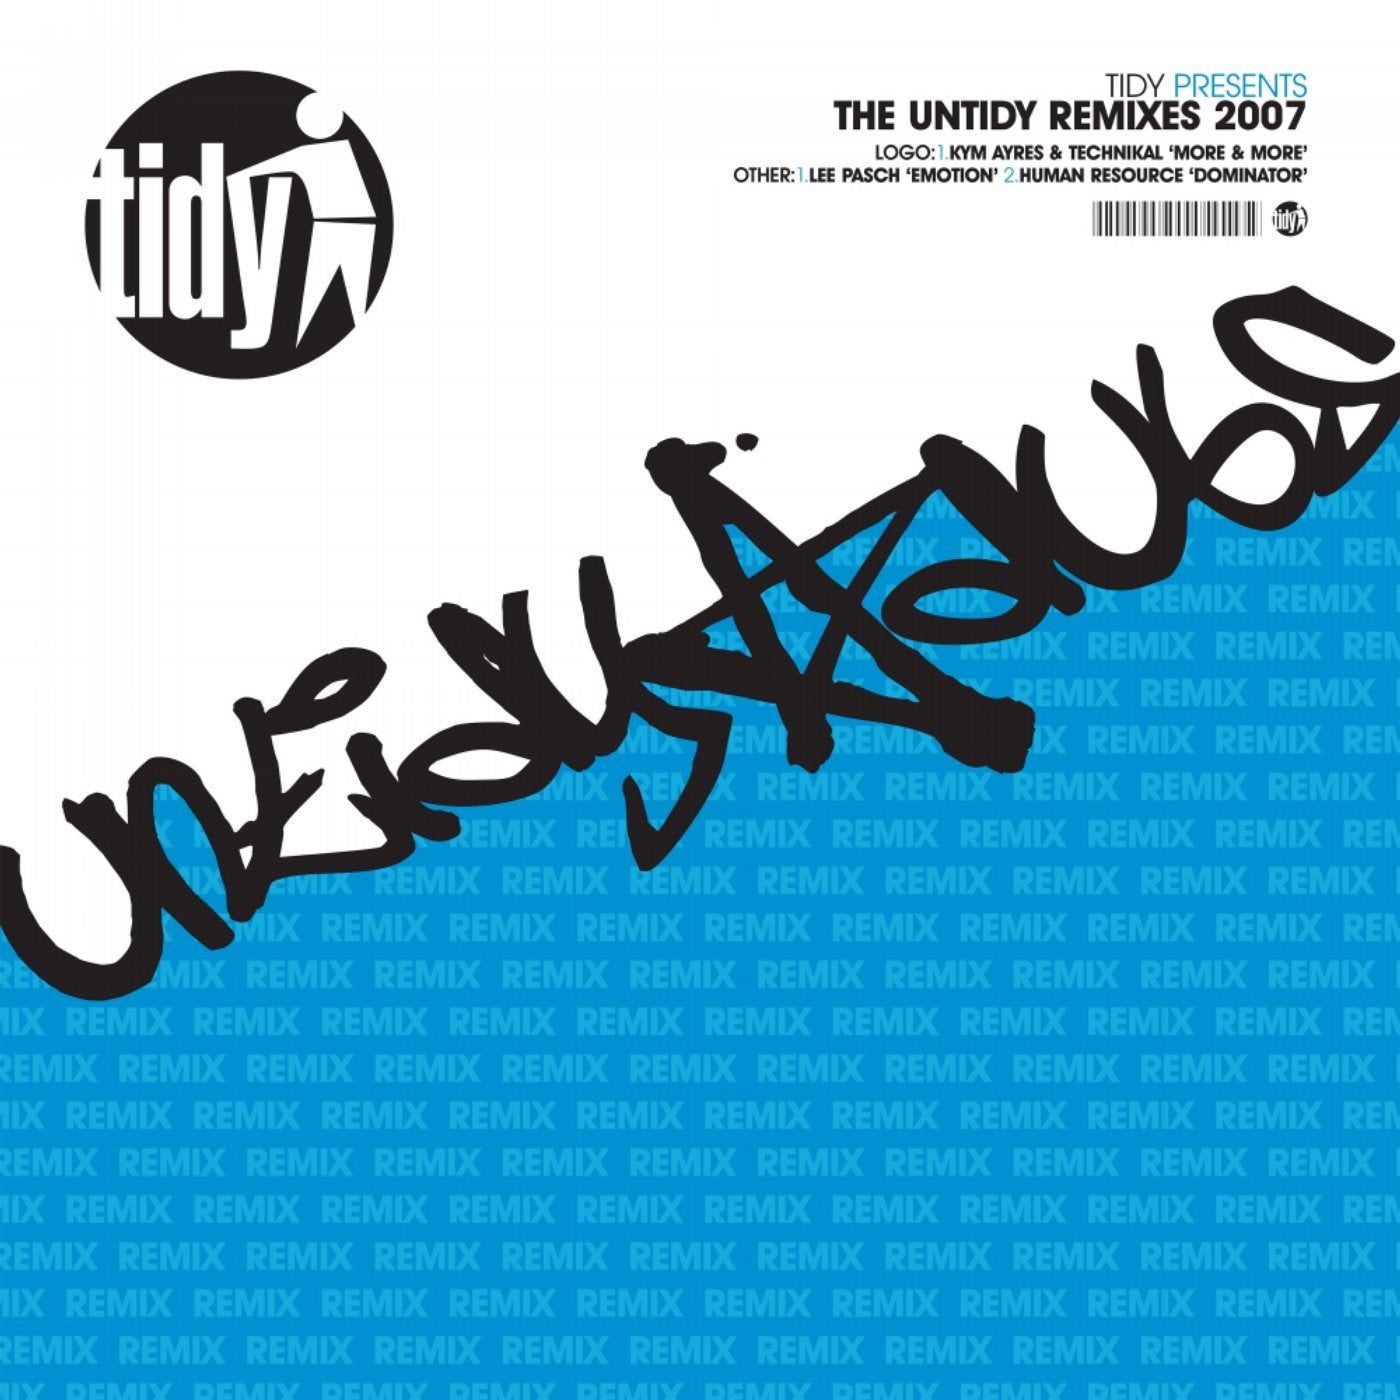 The Untidy Remixes 2007